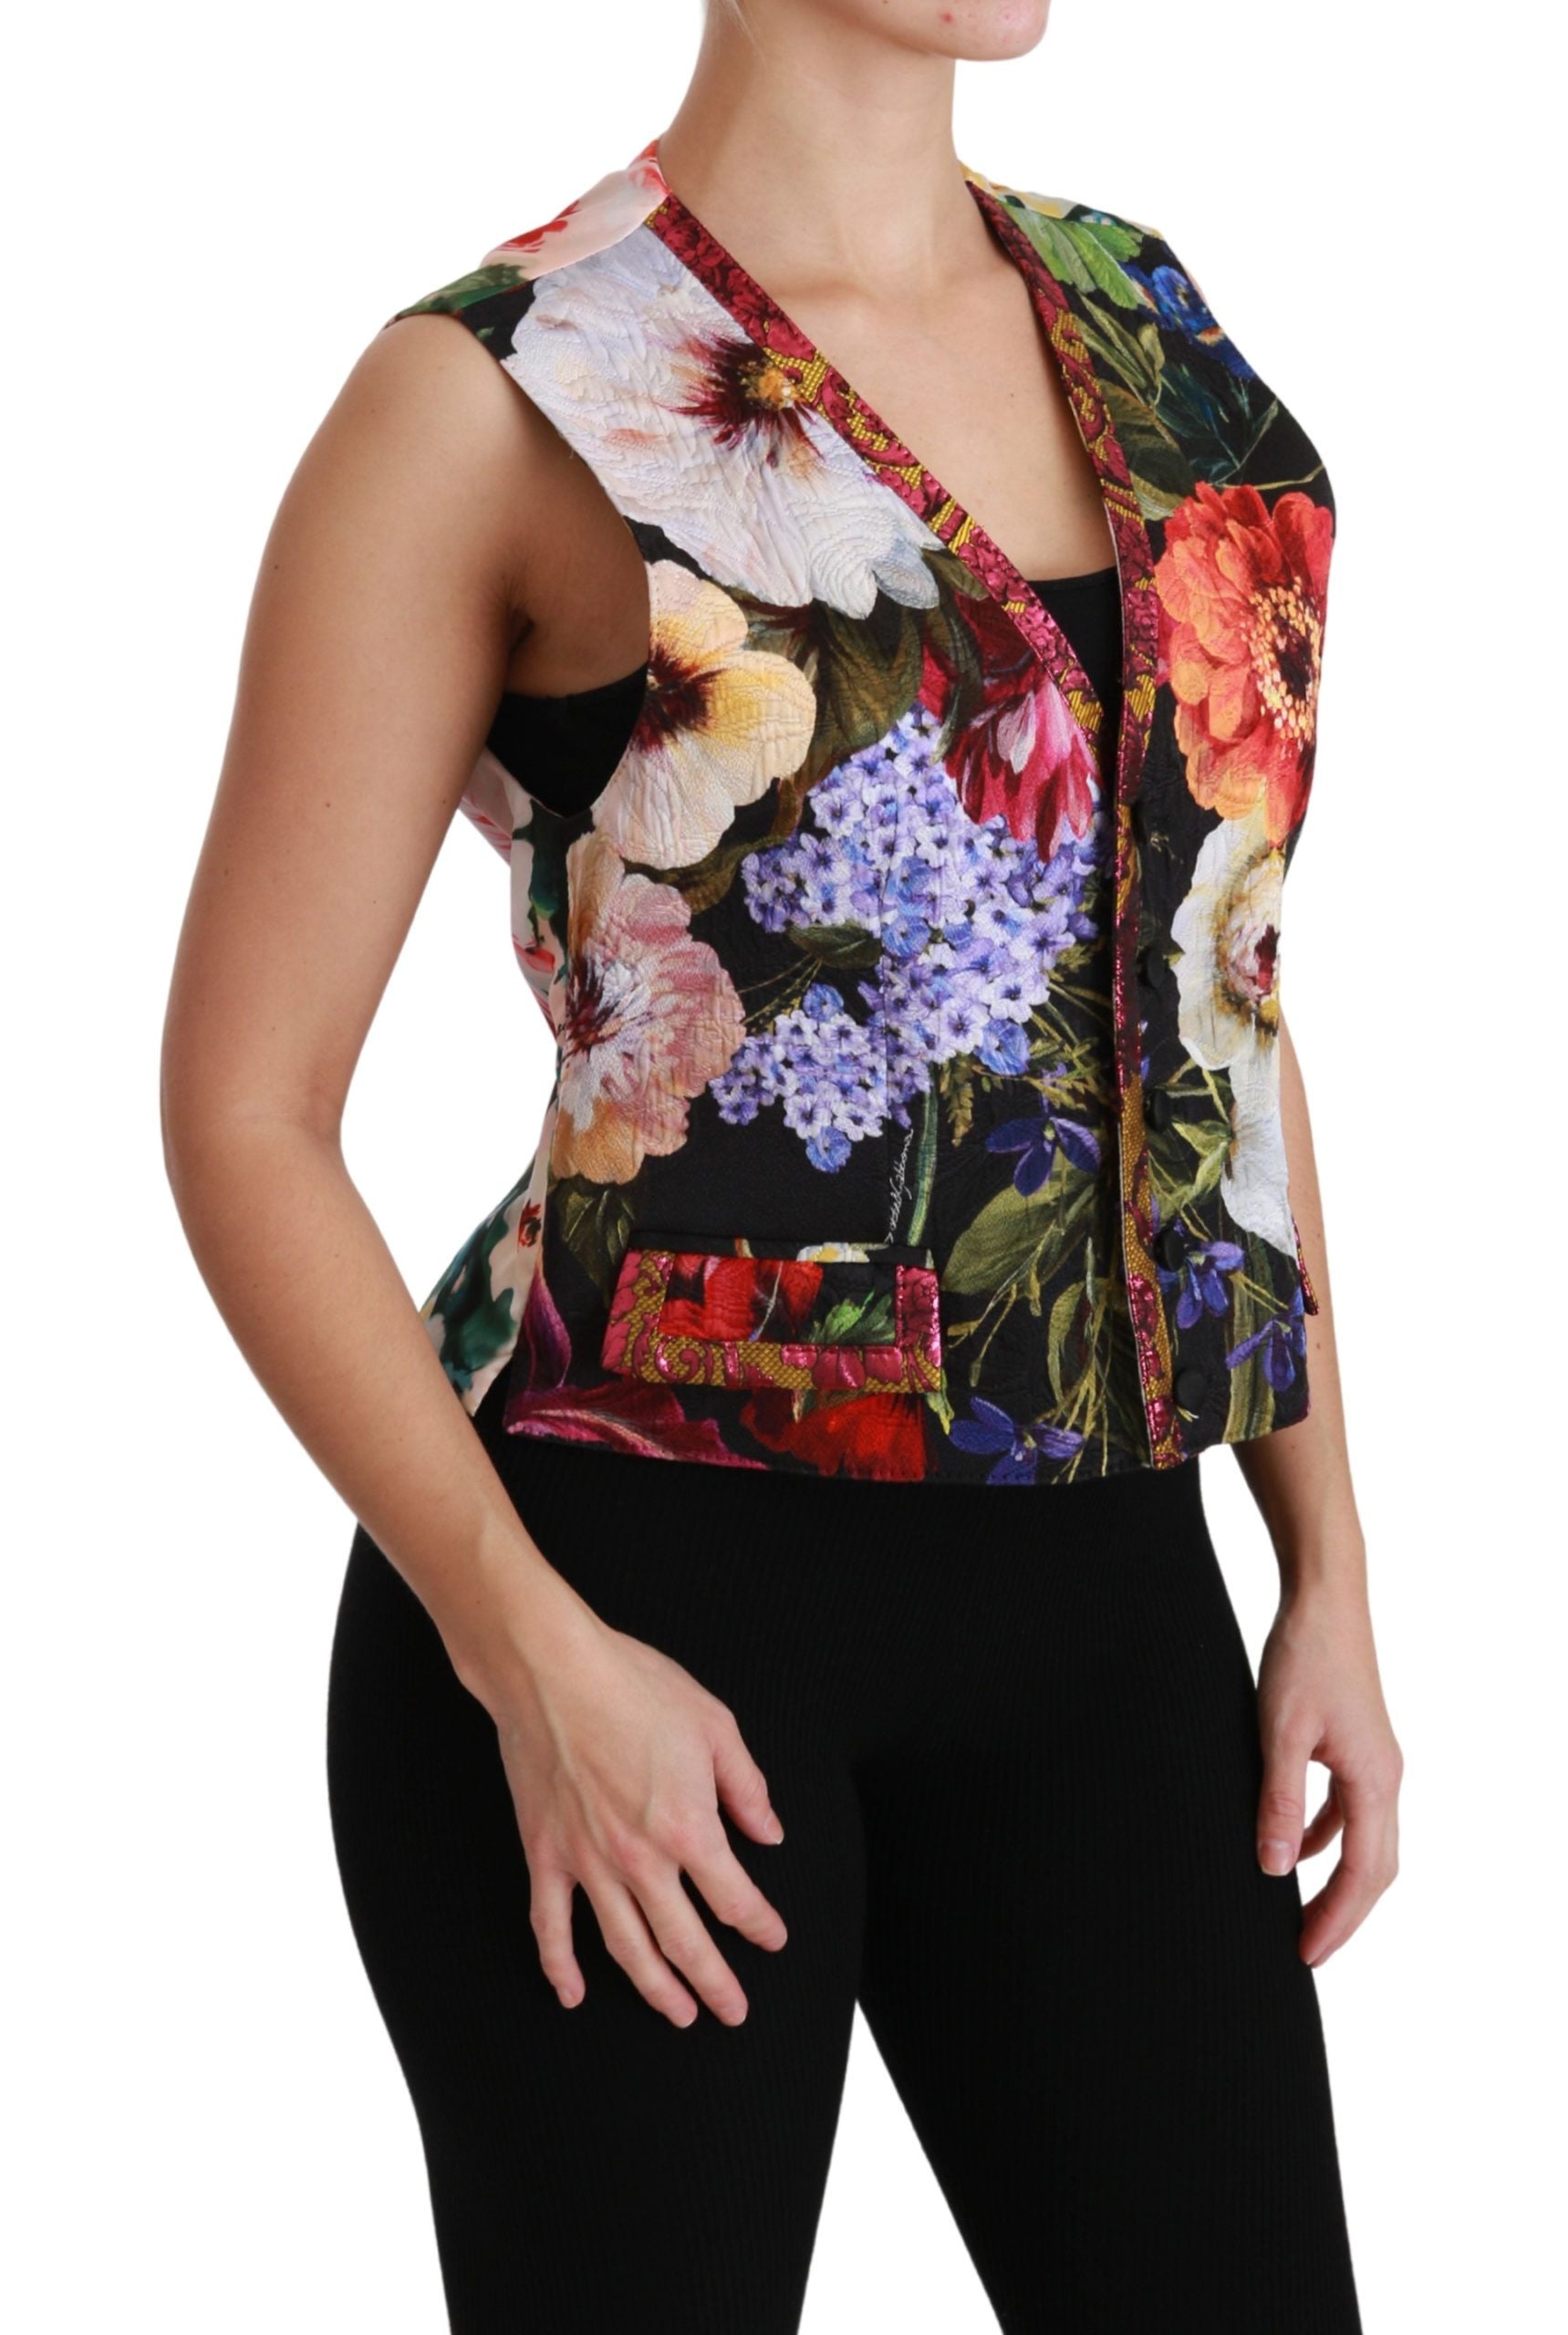 Dolce & Gabbana Multicolor Floral Sleeveless Waistcoat Top Vest - Gio Beverly Hills